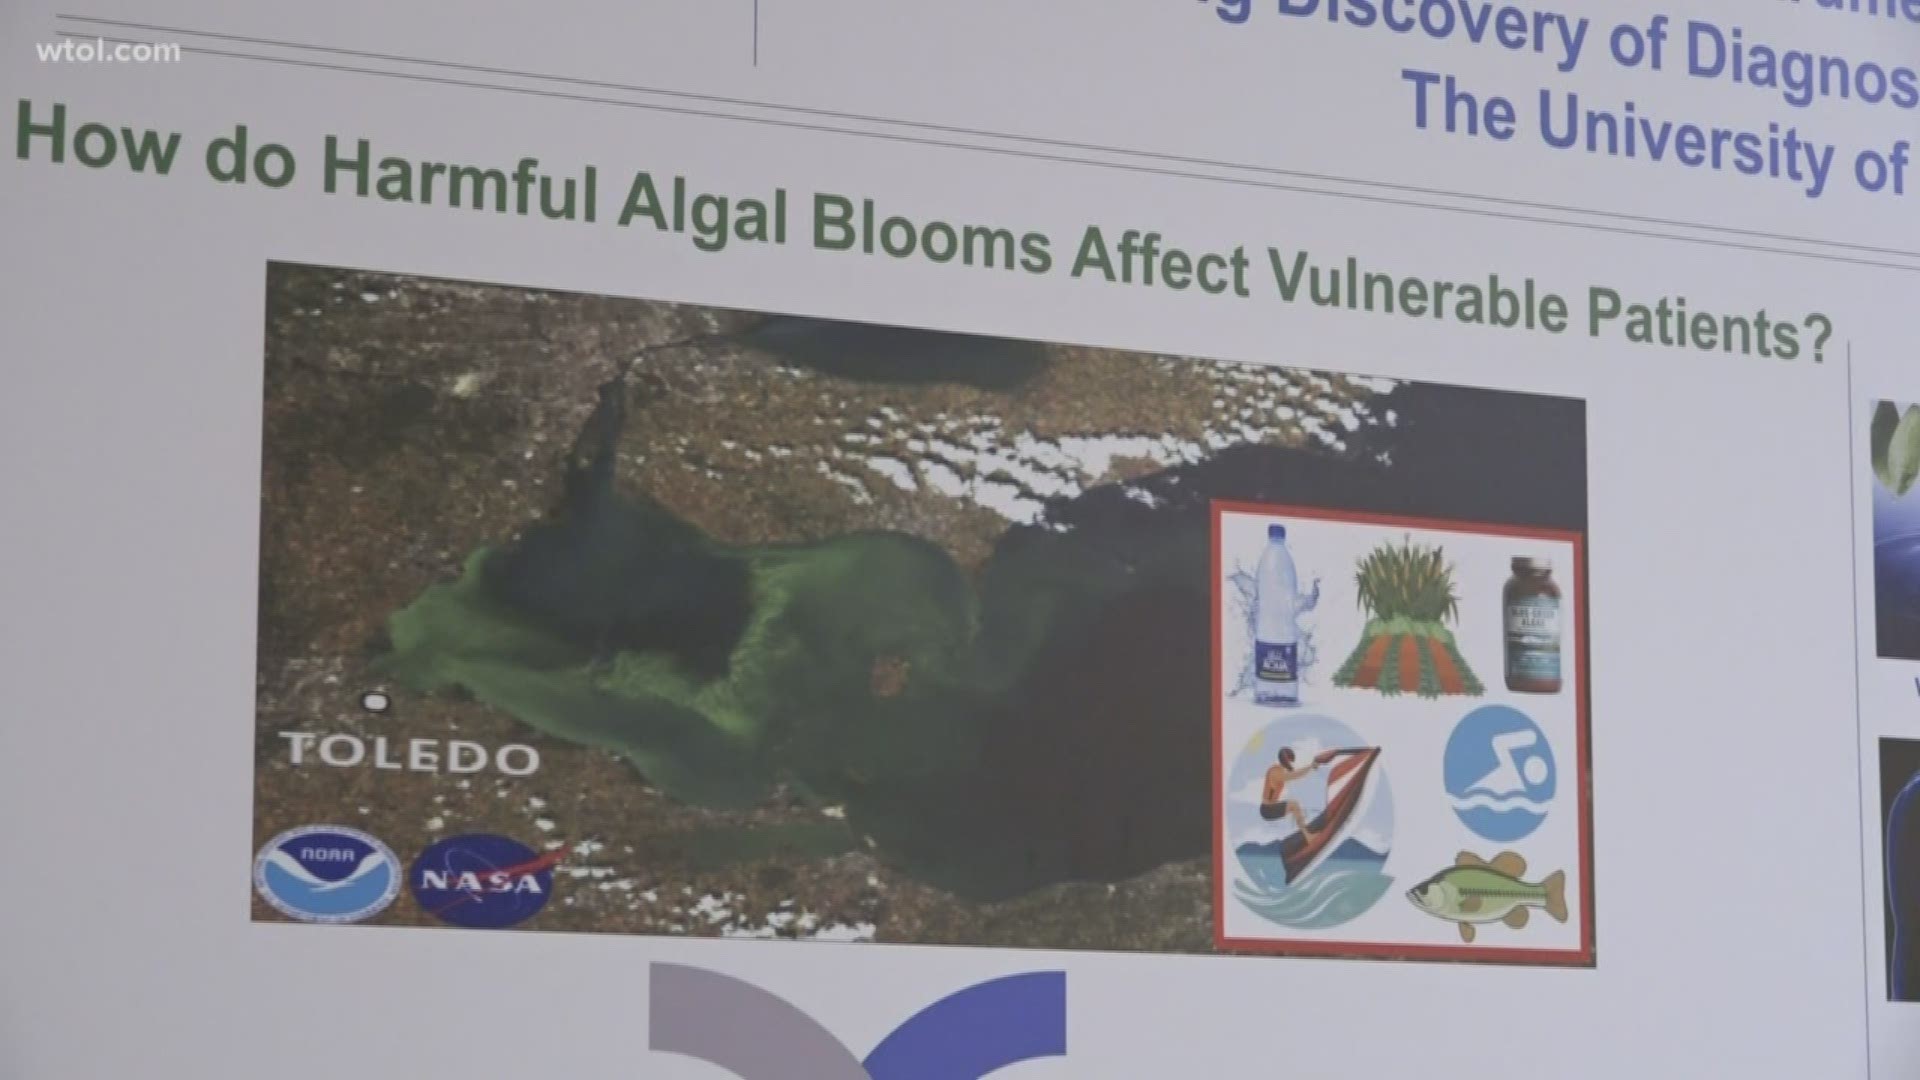 The University of Toledo is finding ways to keep us safe during harmful algal blooms.